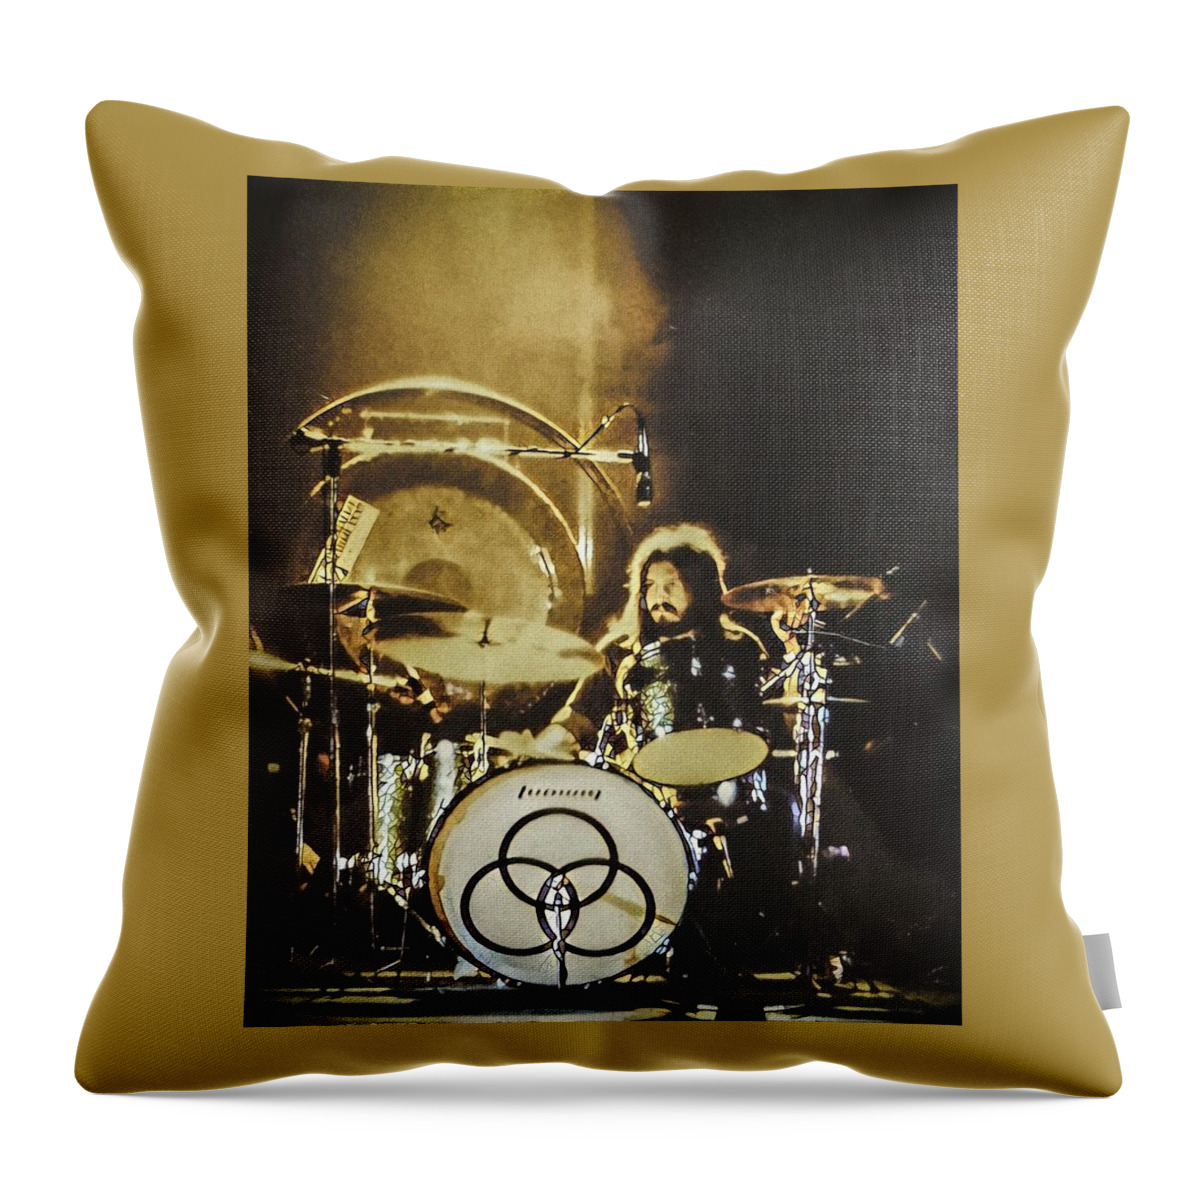 Led Zeppelin Drums John Bonham Music San Diego Drummer Classic Rock Iconic San Diego Sports Arena Ludwig Sparkle 1972 Californialed Zeppelin English Rock Band From London In 1968 Music Band Robert Plant Guitarist Jimmy Page Throw Pillow featuring the digital art Light From Above B by Michael Papariello